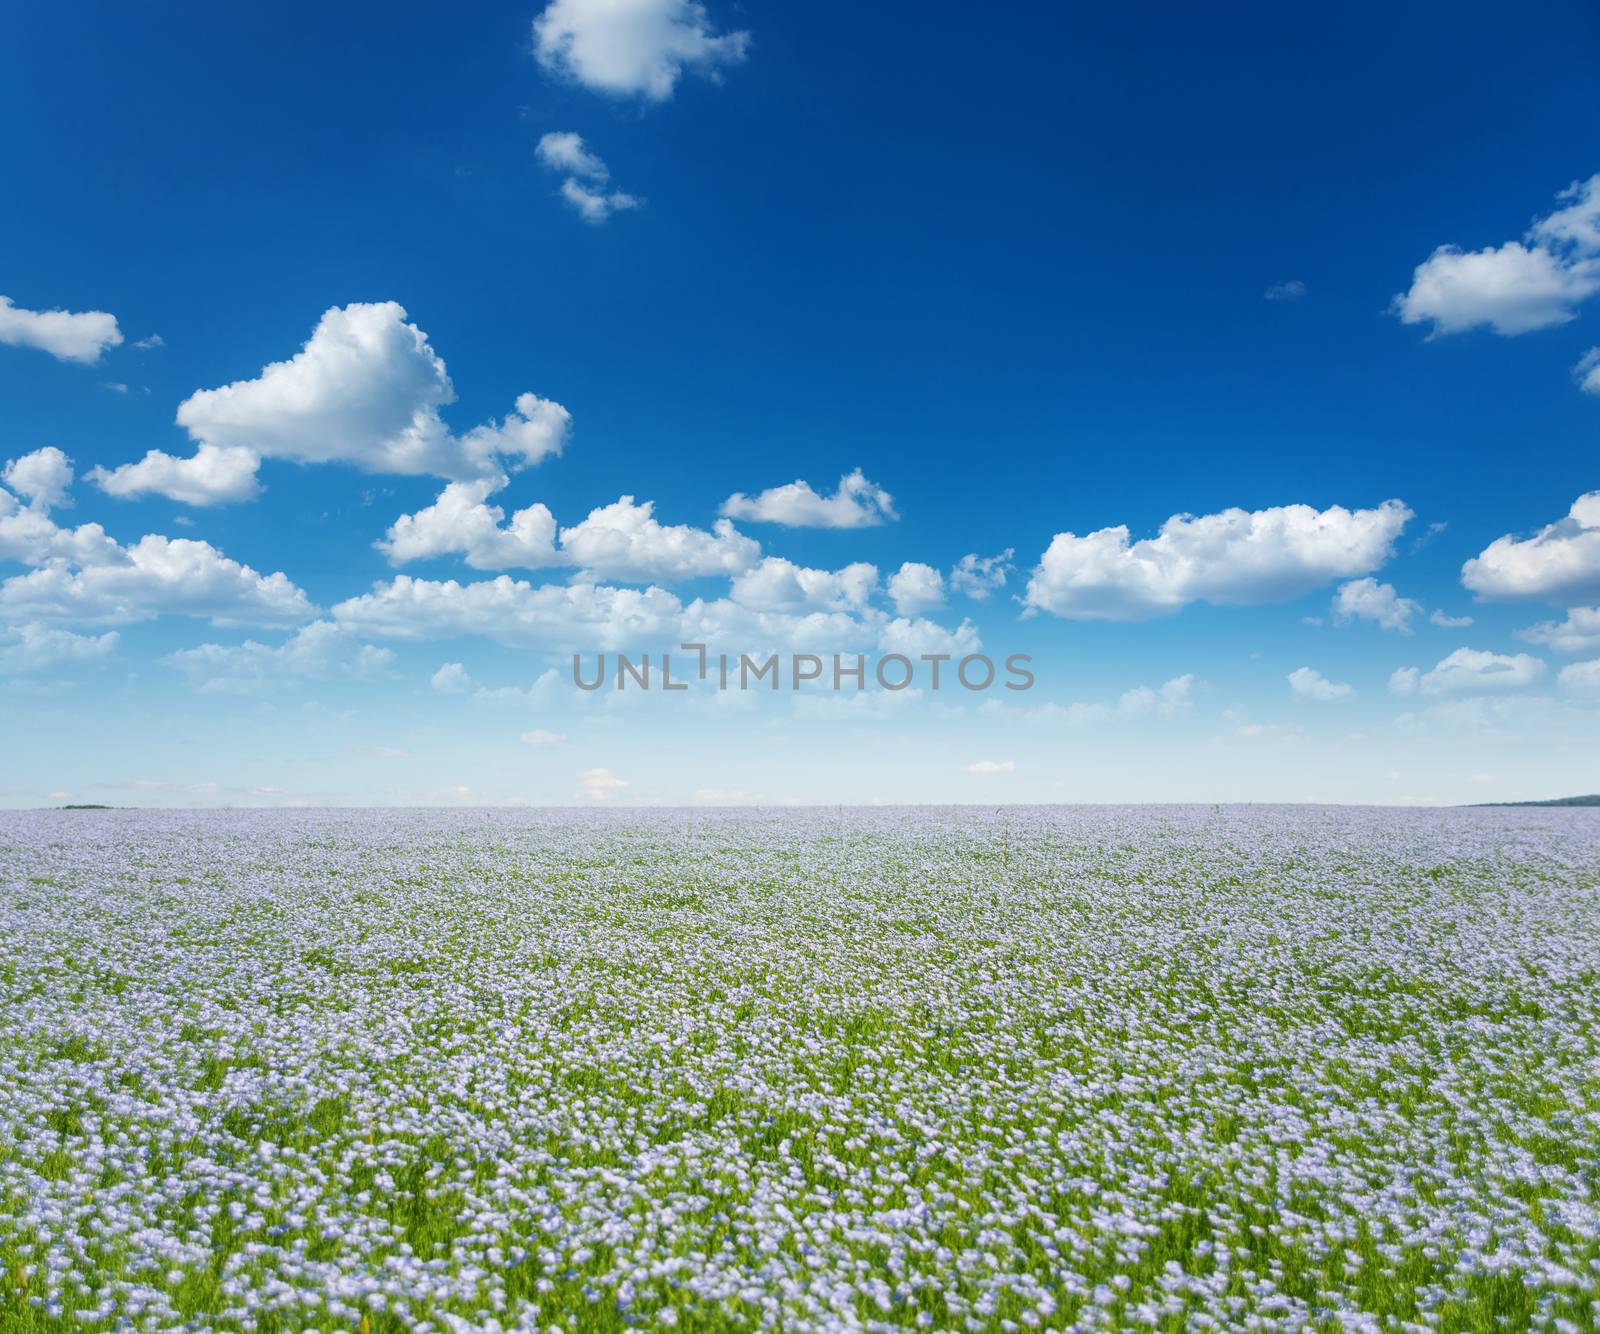 Beautiful rural landscape: vast blue field of blooming flax under the blue sky with white clouds